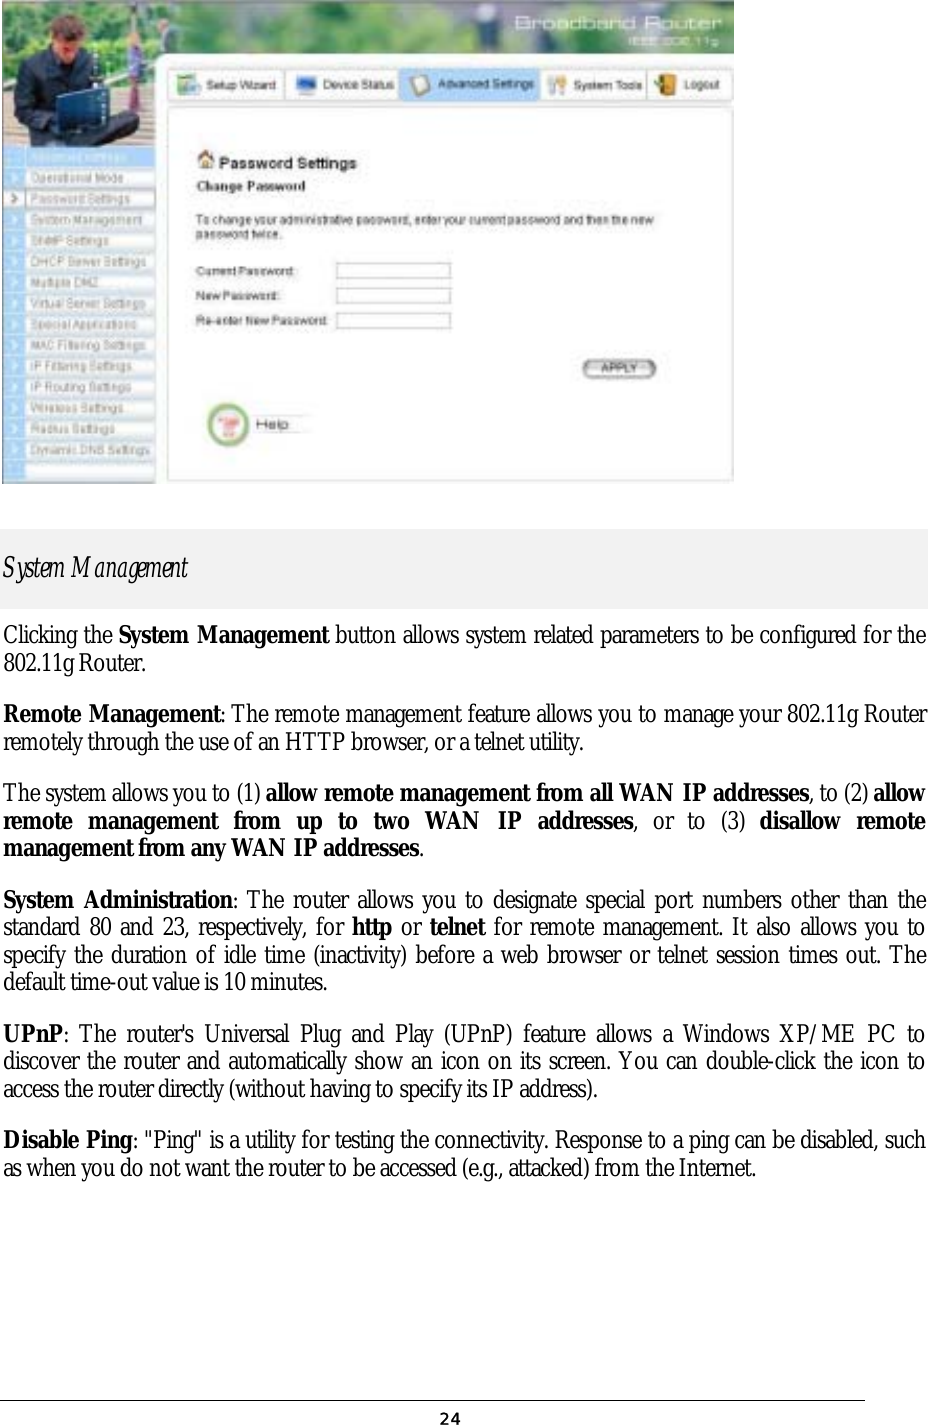  24  System Management Clicking the System Management button allows system related parameters to be configured for the 802.11g Router.  Remote Management: The remote management feature allows you to manage your 802.11g Router remotely through the use of an HTTP browser, or a telnet utility. The system allows you to (1) allow remote management from all WAN IP addresses, to (2) allow remote management from up to two WAN IP addresses, or to (3) disallow remote management from any WAN IP addresses.  System Administration: The router allows you to designate special port numbers other than the standard 80 and 23, respectively, for http or telnet for remote management. It also allows you to specify the duration of idle time (inactivity) before a web browser or telnet session times out. The default time-out value is 10 minutes. UPnP: The router&apos;s Universal Plug and Play (UPnP) feature allows a Windows XP/ME PC to discover the router and automatically show an icon on its screen. You can double-click the icon to access the router directly (without having to specify its IP address). Disable Ping: &quot;Ping&quot; is a utility for testing the connectivity. Response to a ping can be disabled, such as when you do not want the router to be accessed (e.g., attacked) from the Internet. 